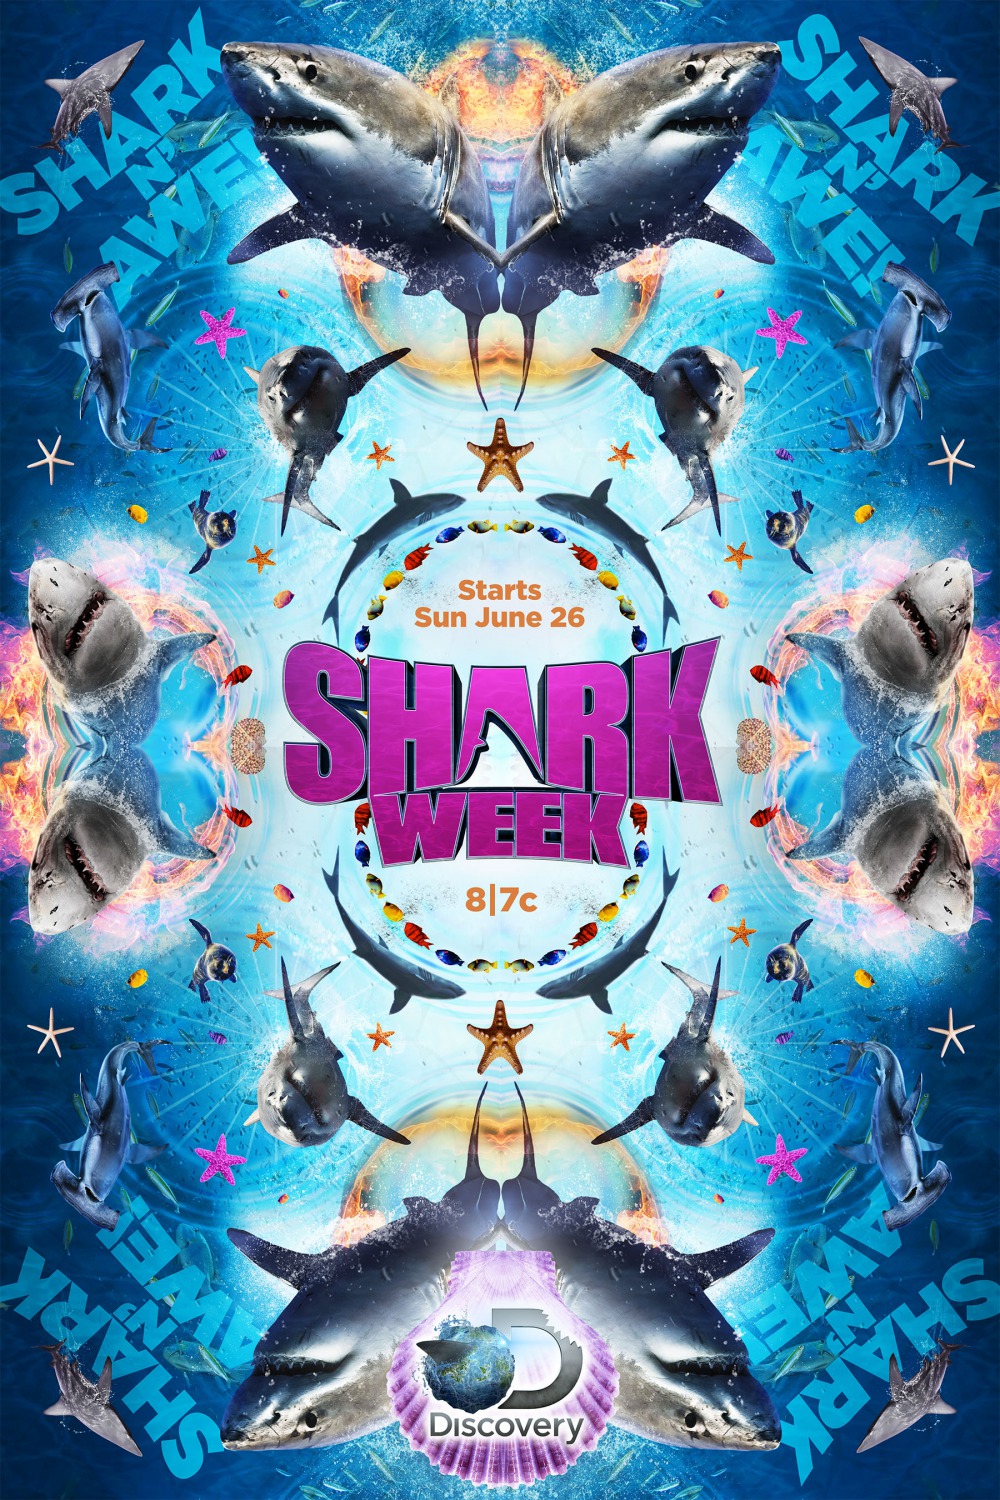 Extra Large Movie Poster Image for Shark Week 